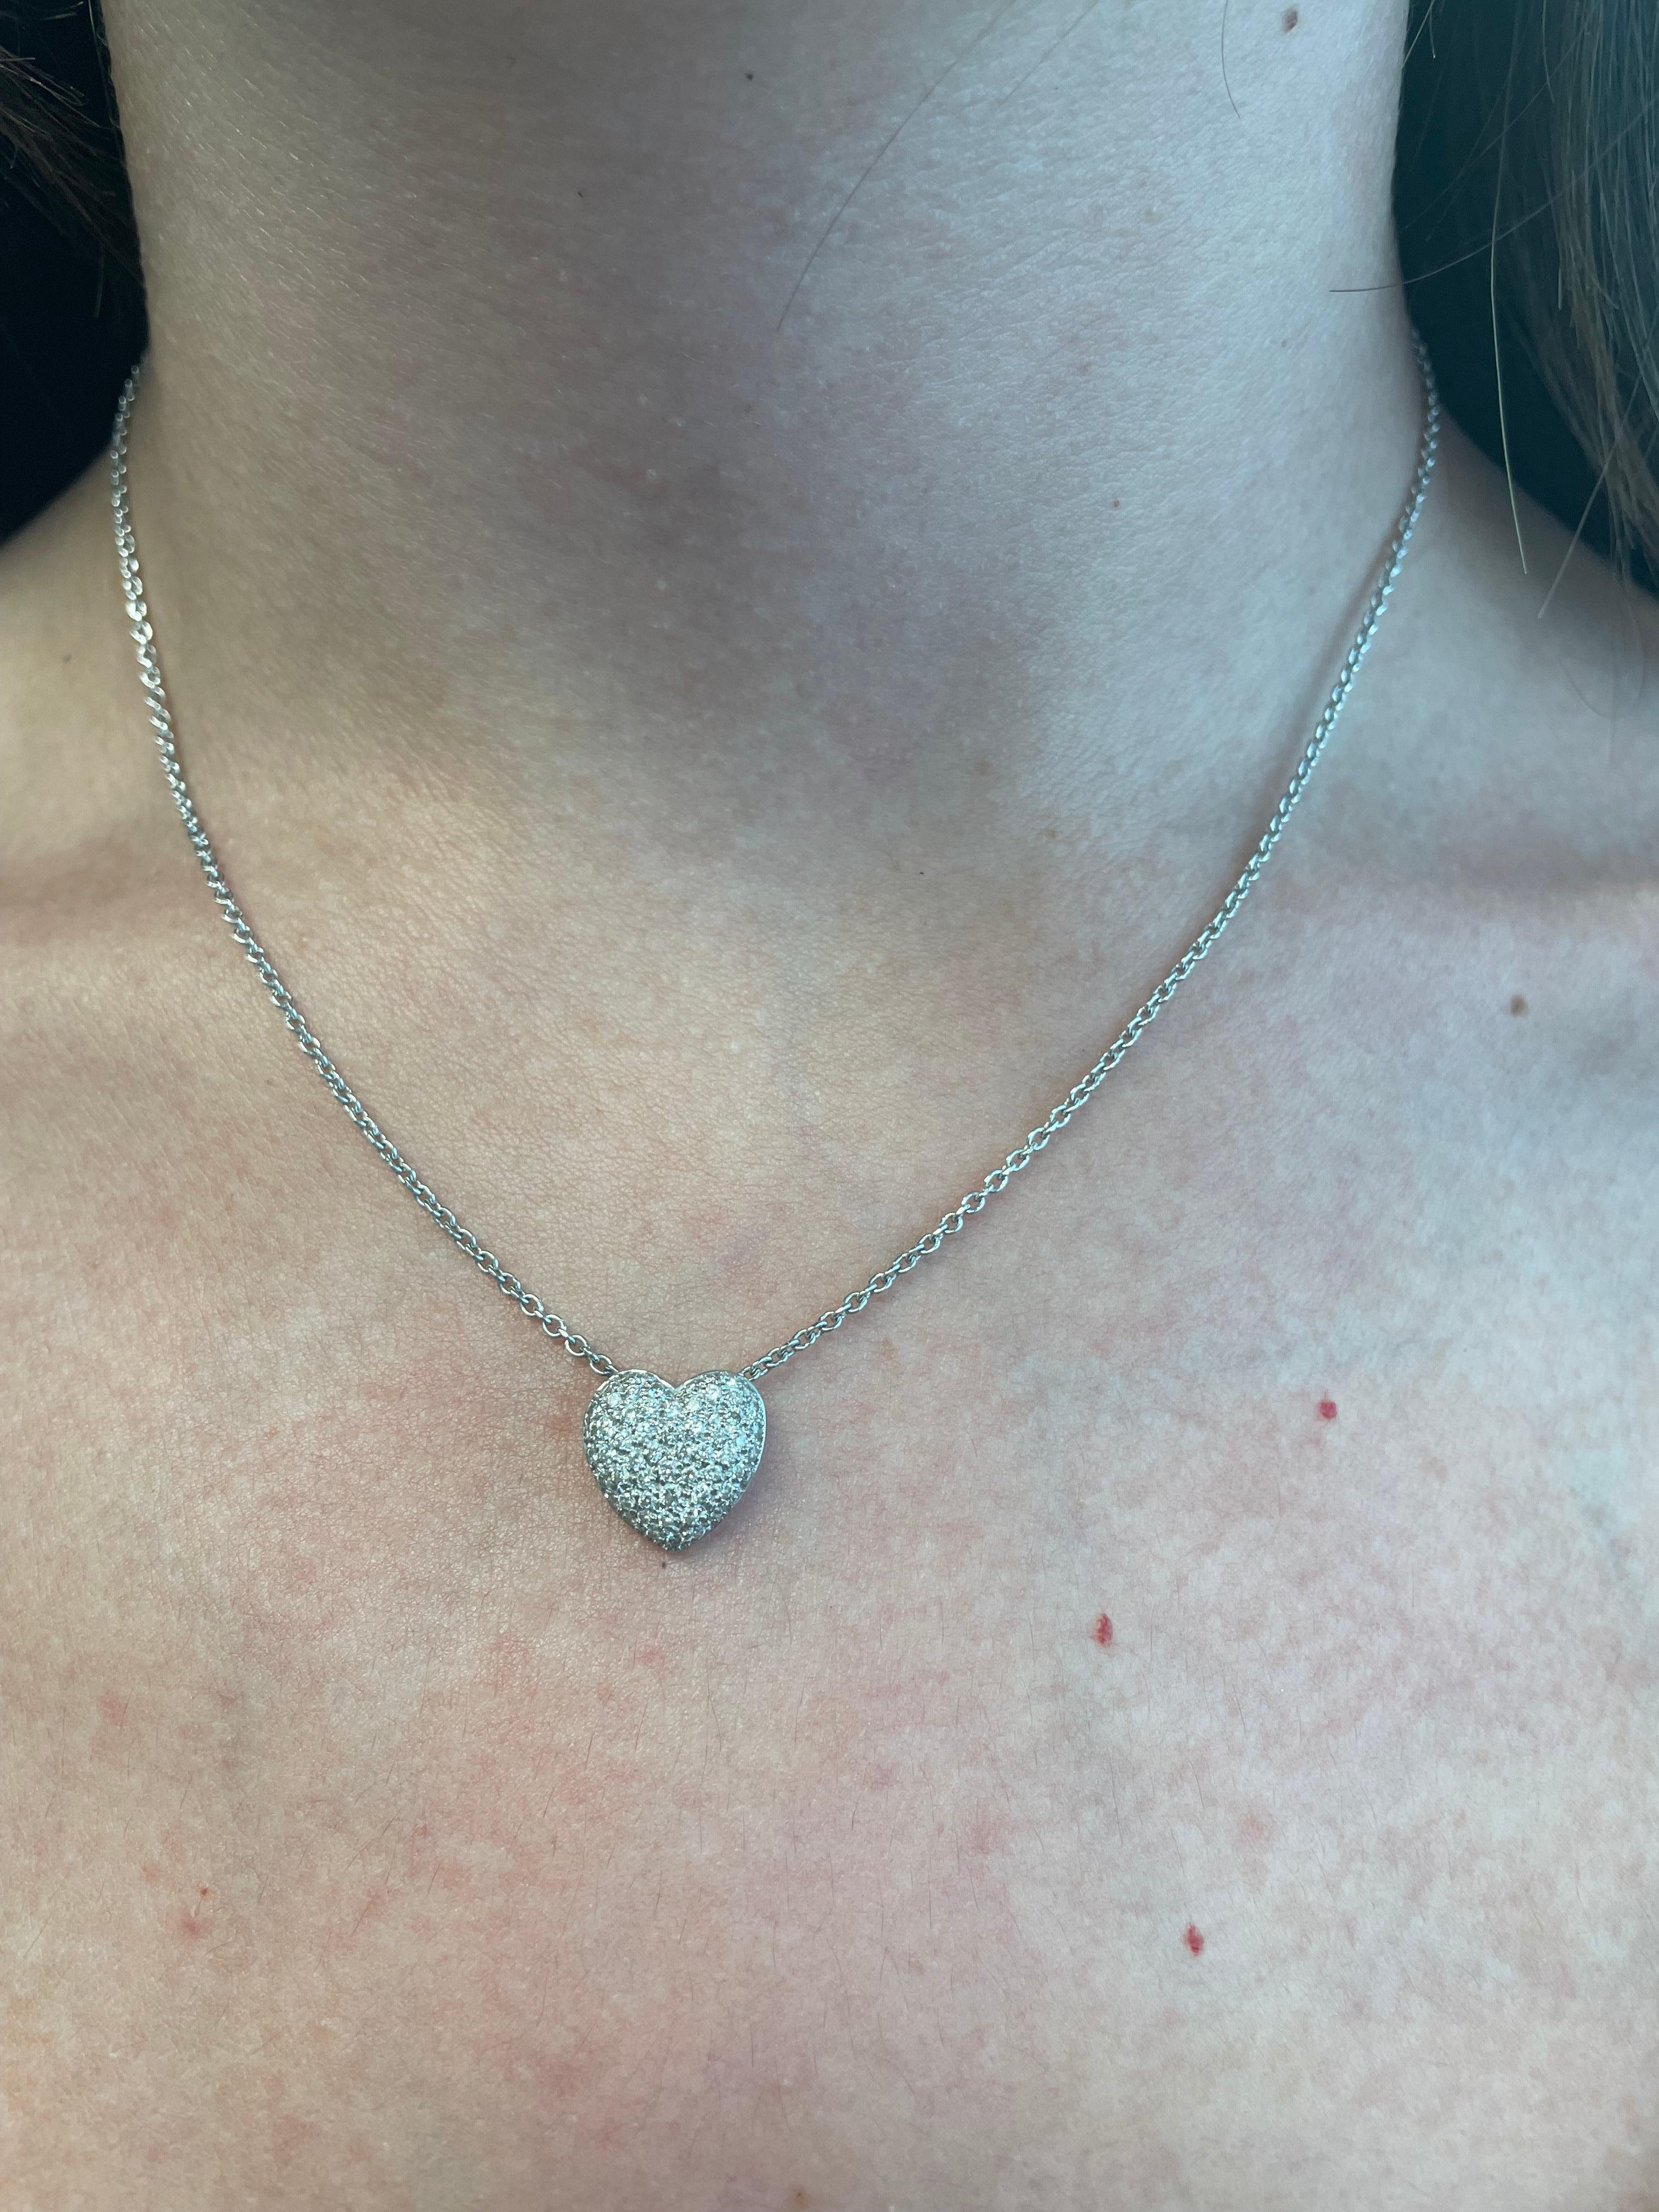 Beautiful modern pave set diamond heart pendant.
60 round brilliant diamonds, 0.69 carats. Approximately H/I color and SI clarity. 18-karat white gold, 16in.
Accommodated with an up-to-date digital appraisal by a GIA G.G. once purchased, upon